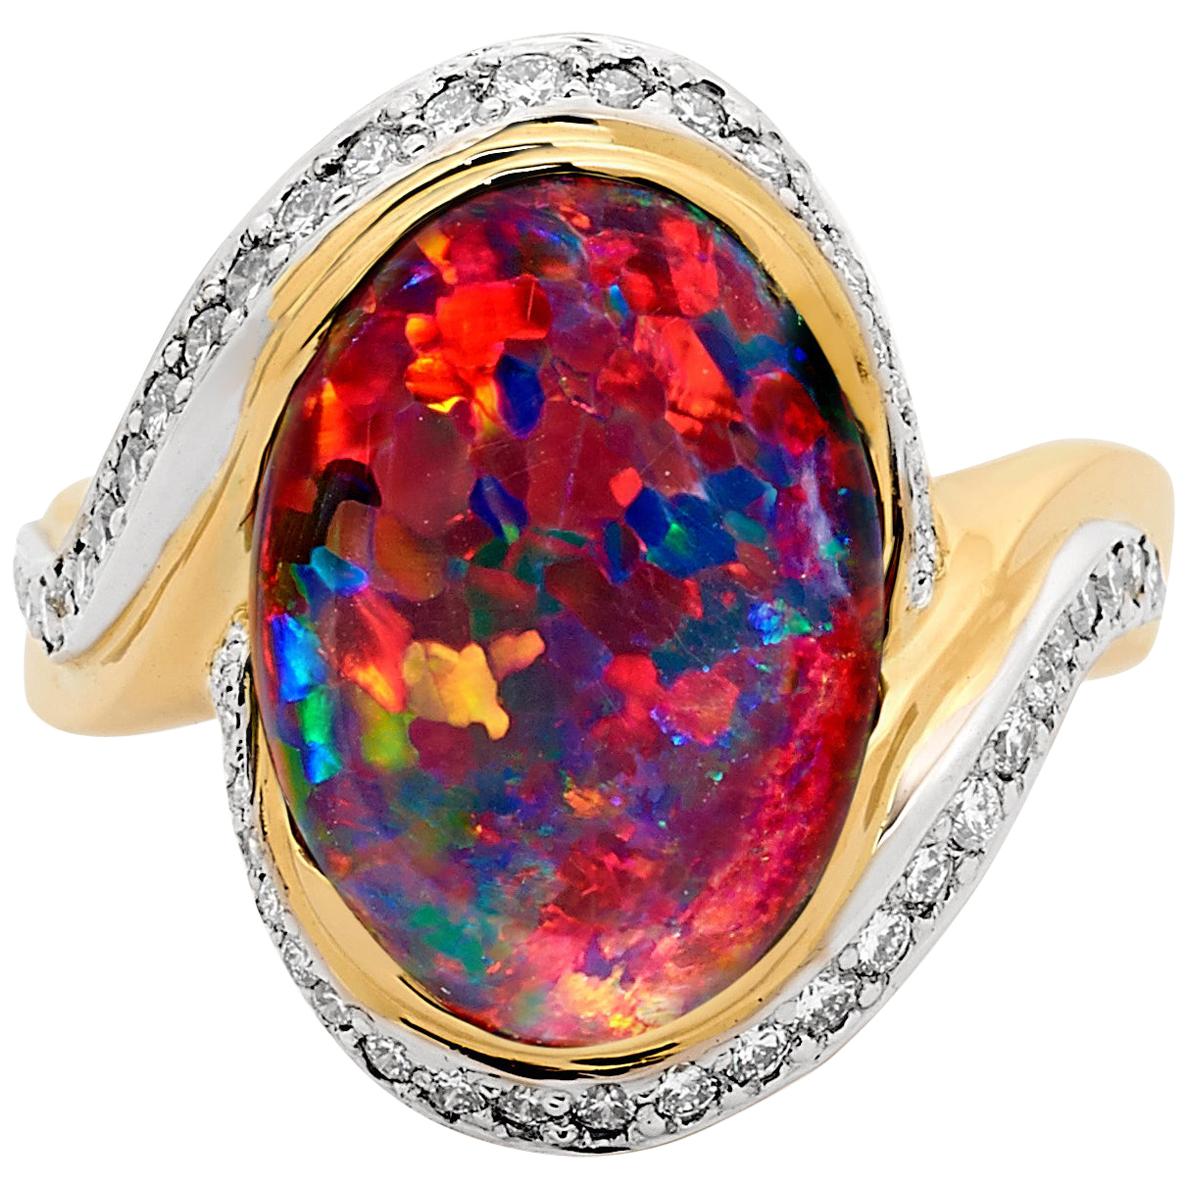 Australian 5.48ct Black Opal and Diamond Cocktail Ring in 18K Gold